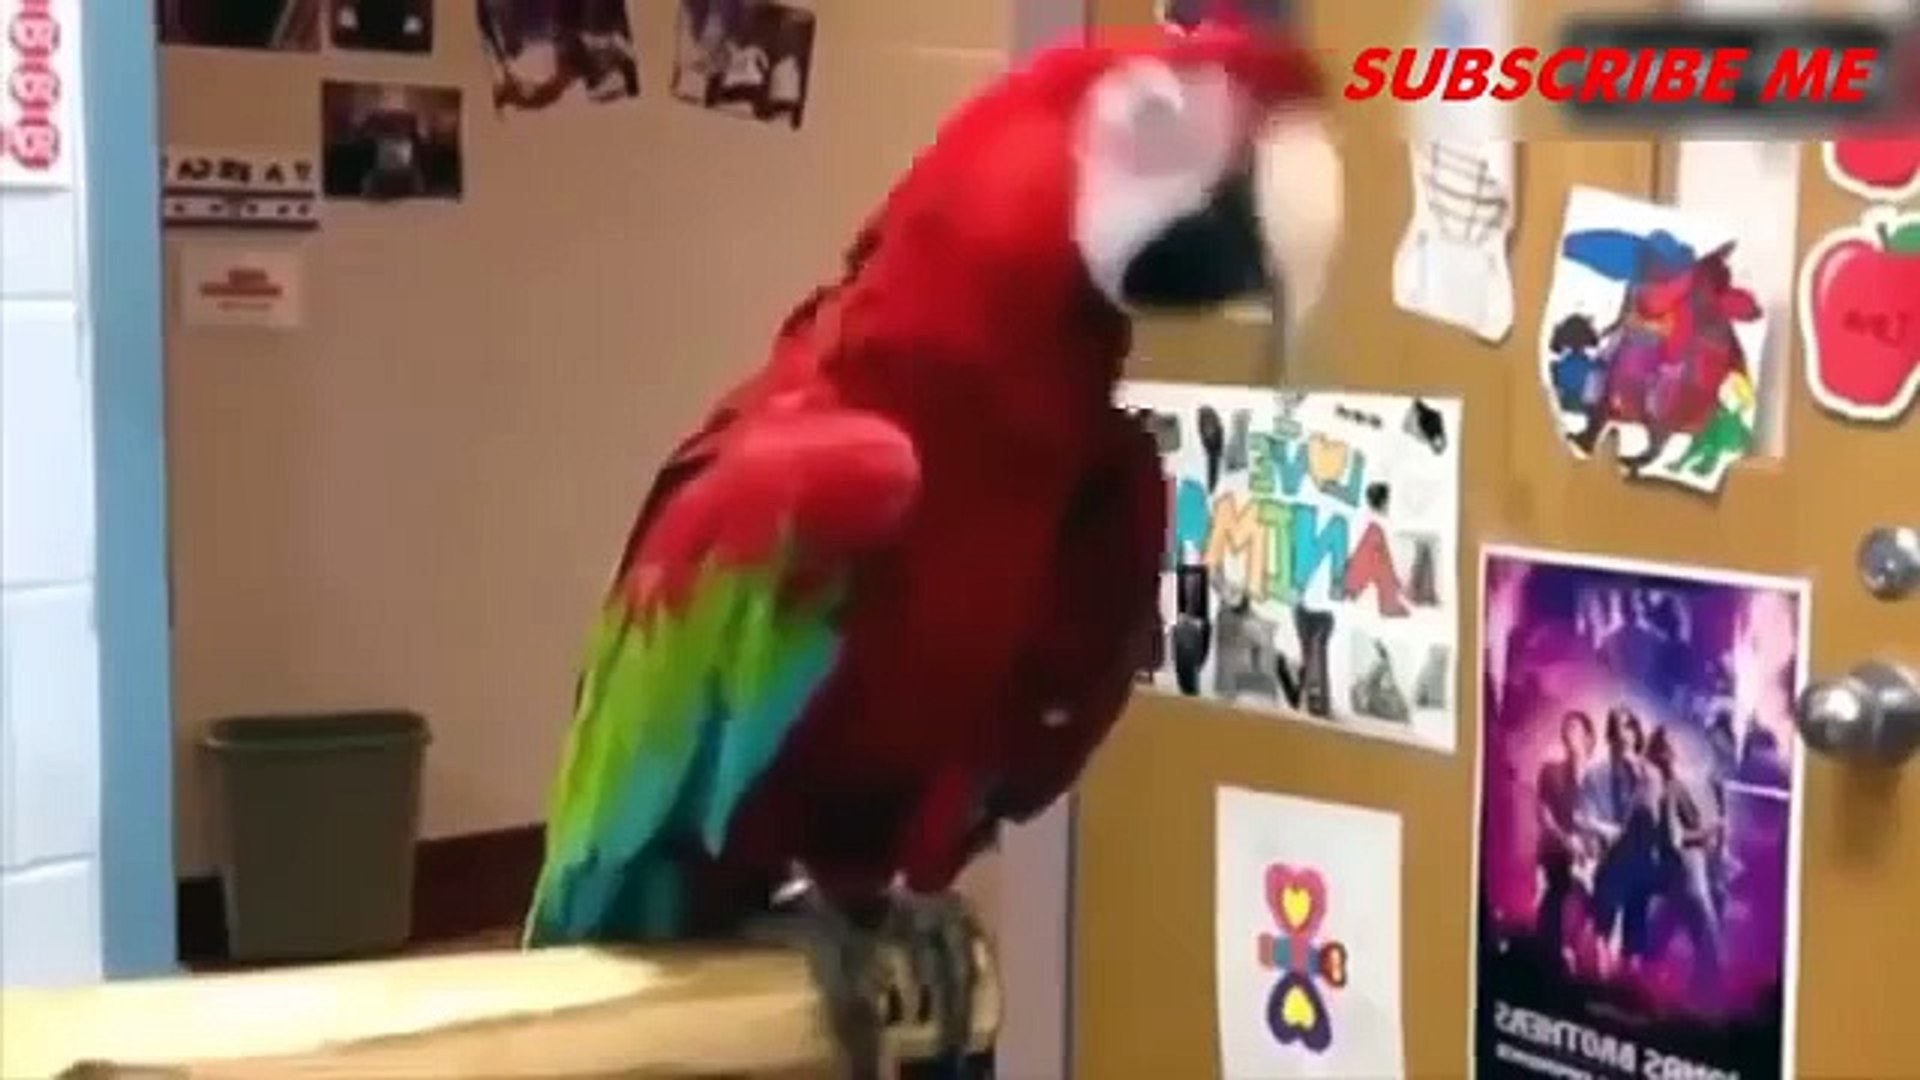 Musical parrots and parakeets impersonators. Funny parrot dancing and parody